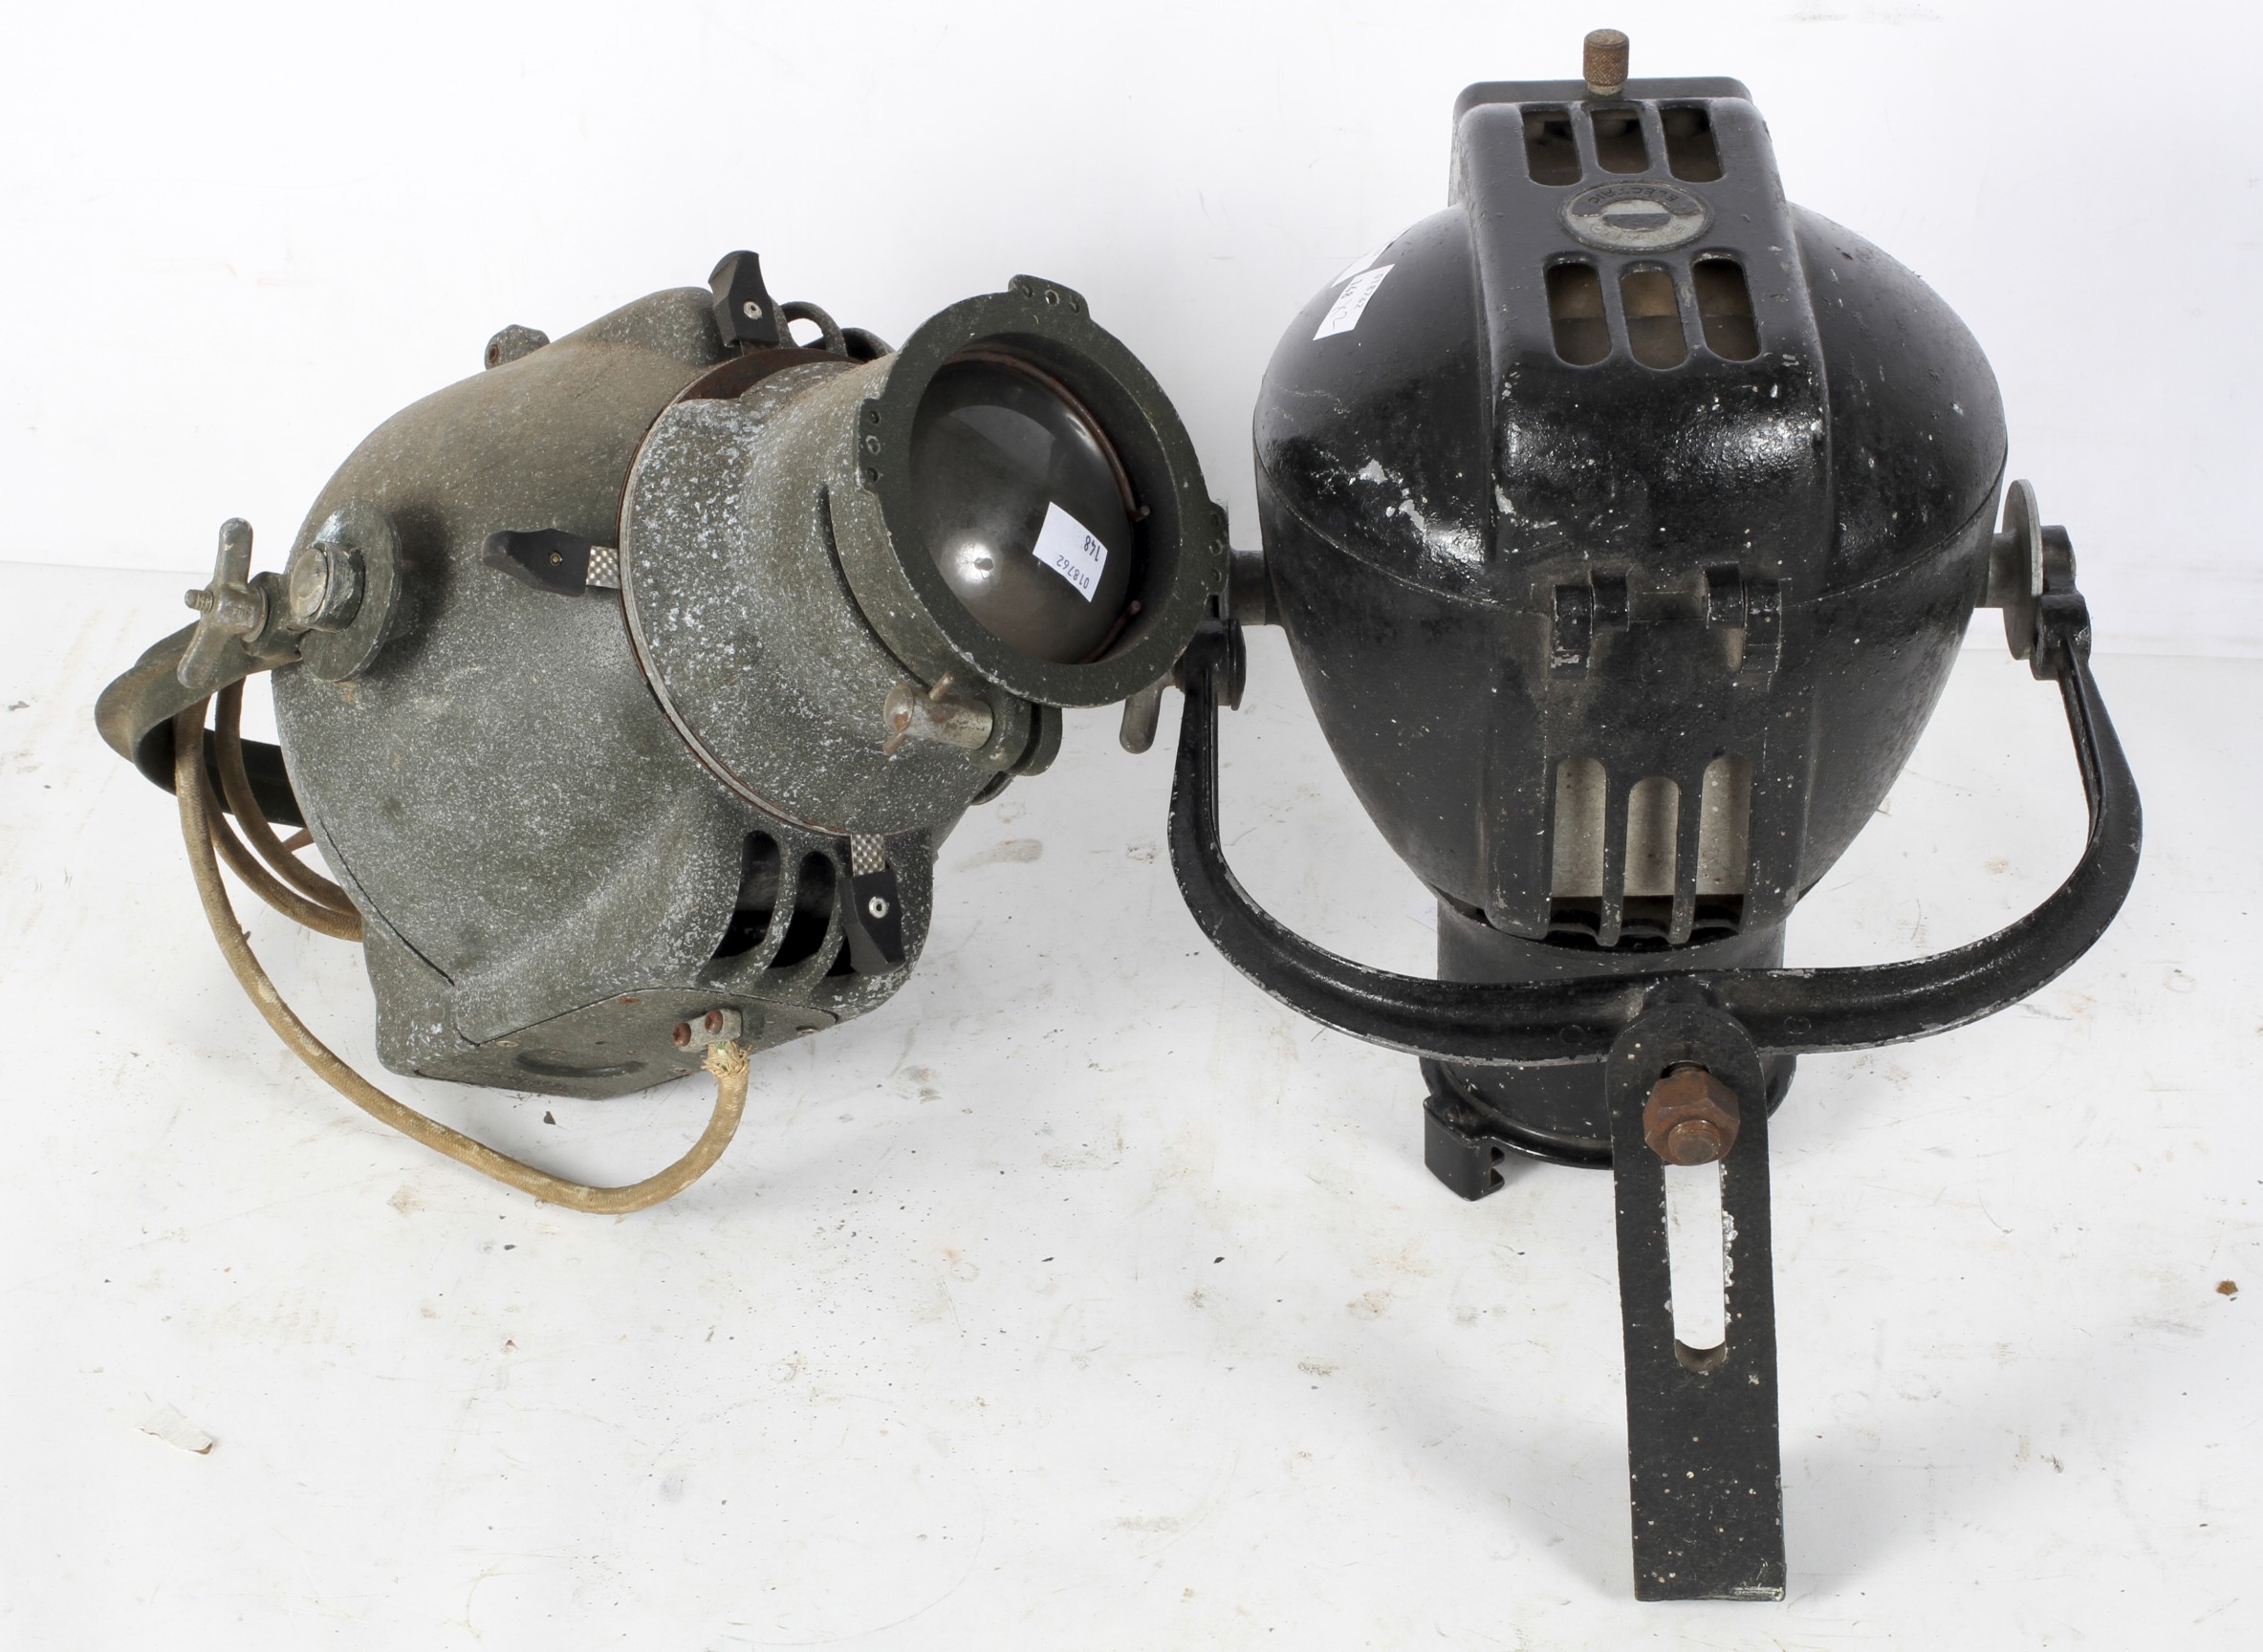 Two Strand Electric industrial lamps including one black example - Image 2 of 2